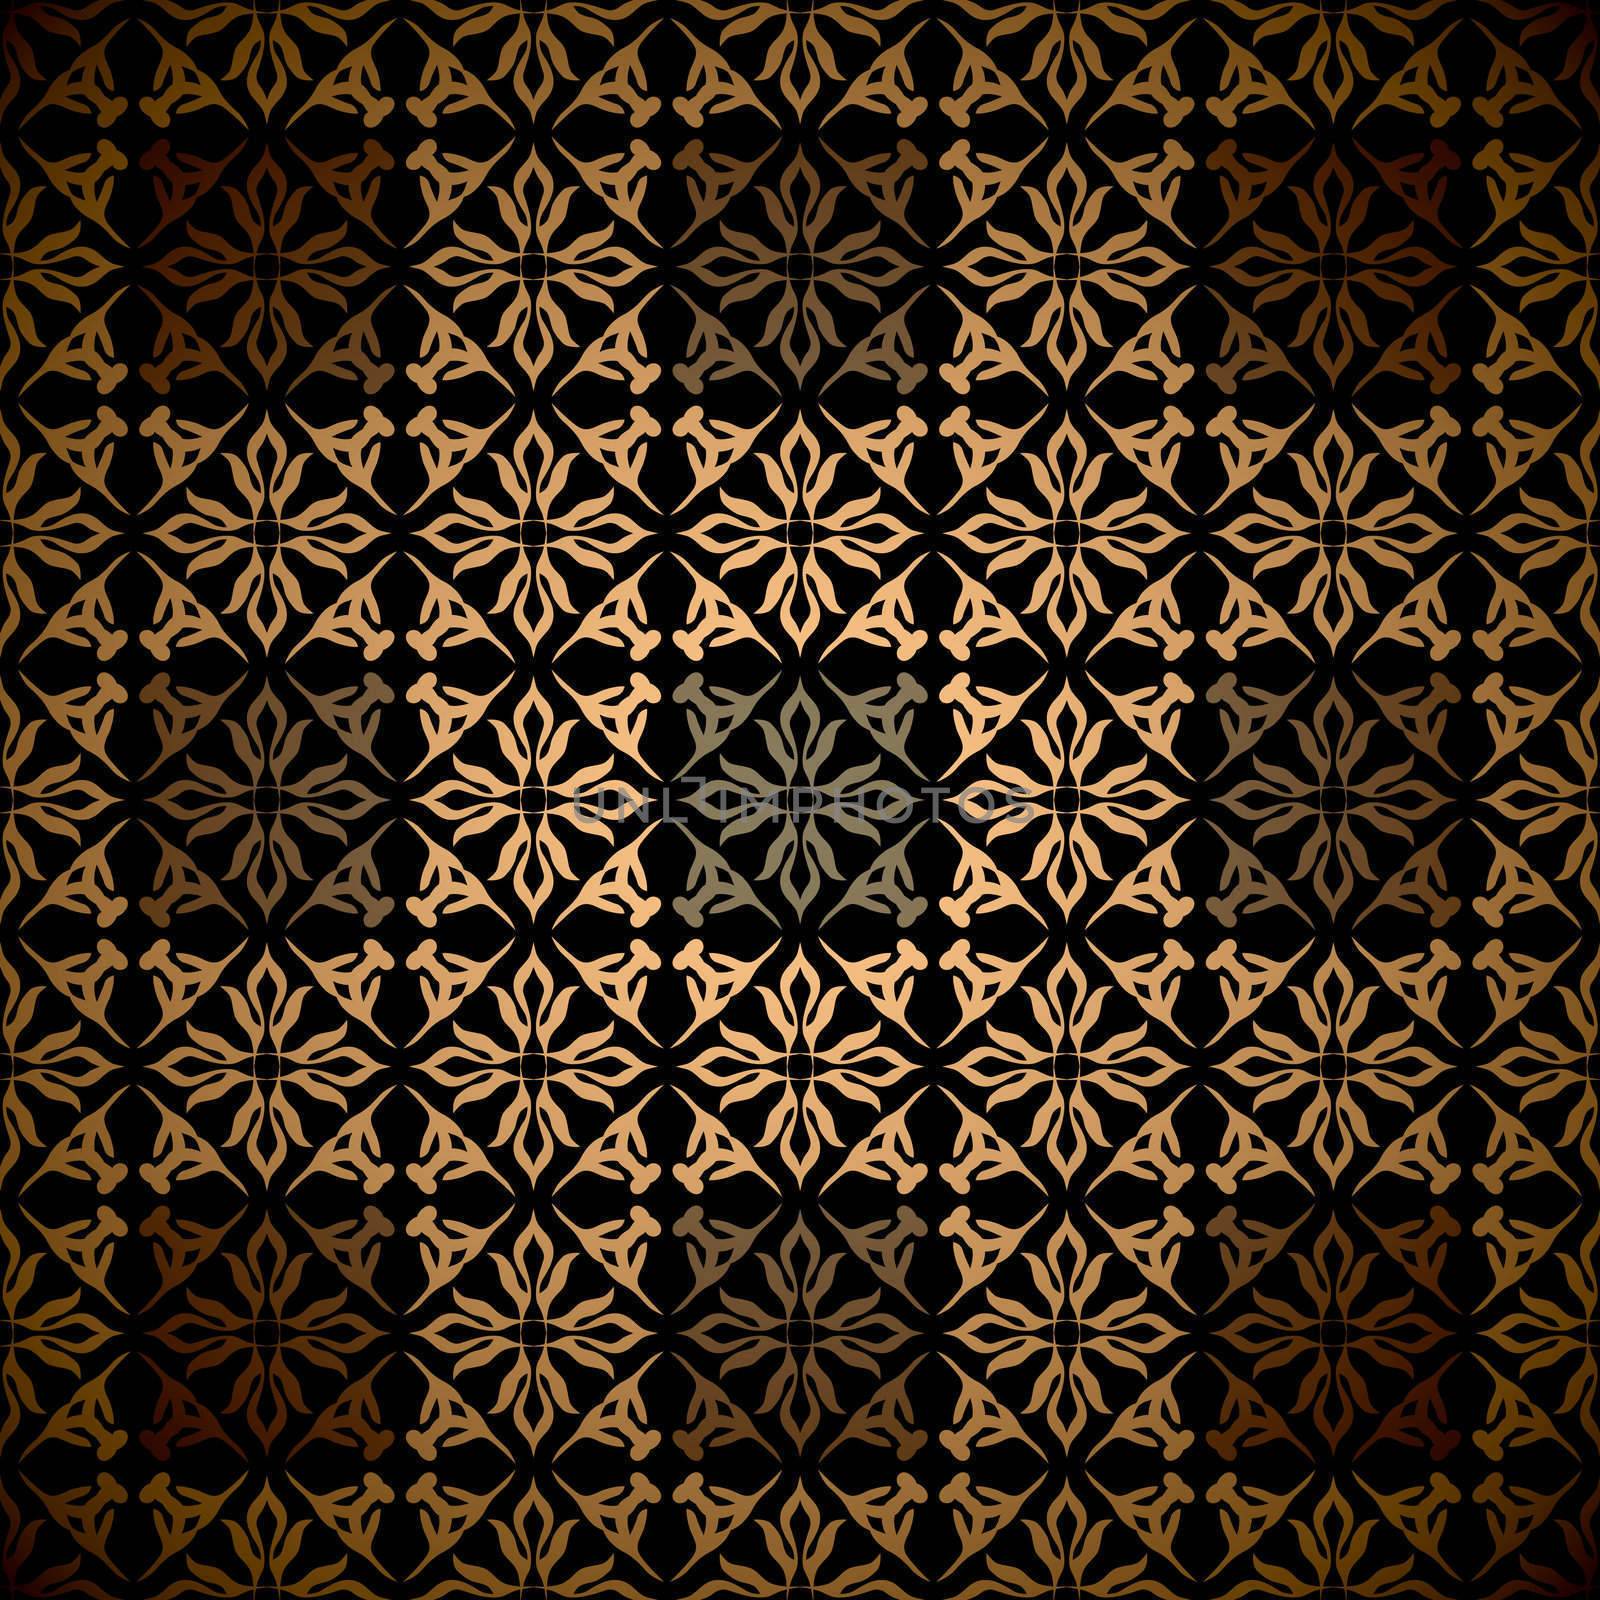 Gold floral abstract seamless wallpaper pattern background
